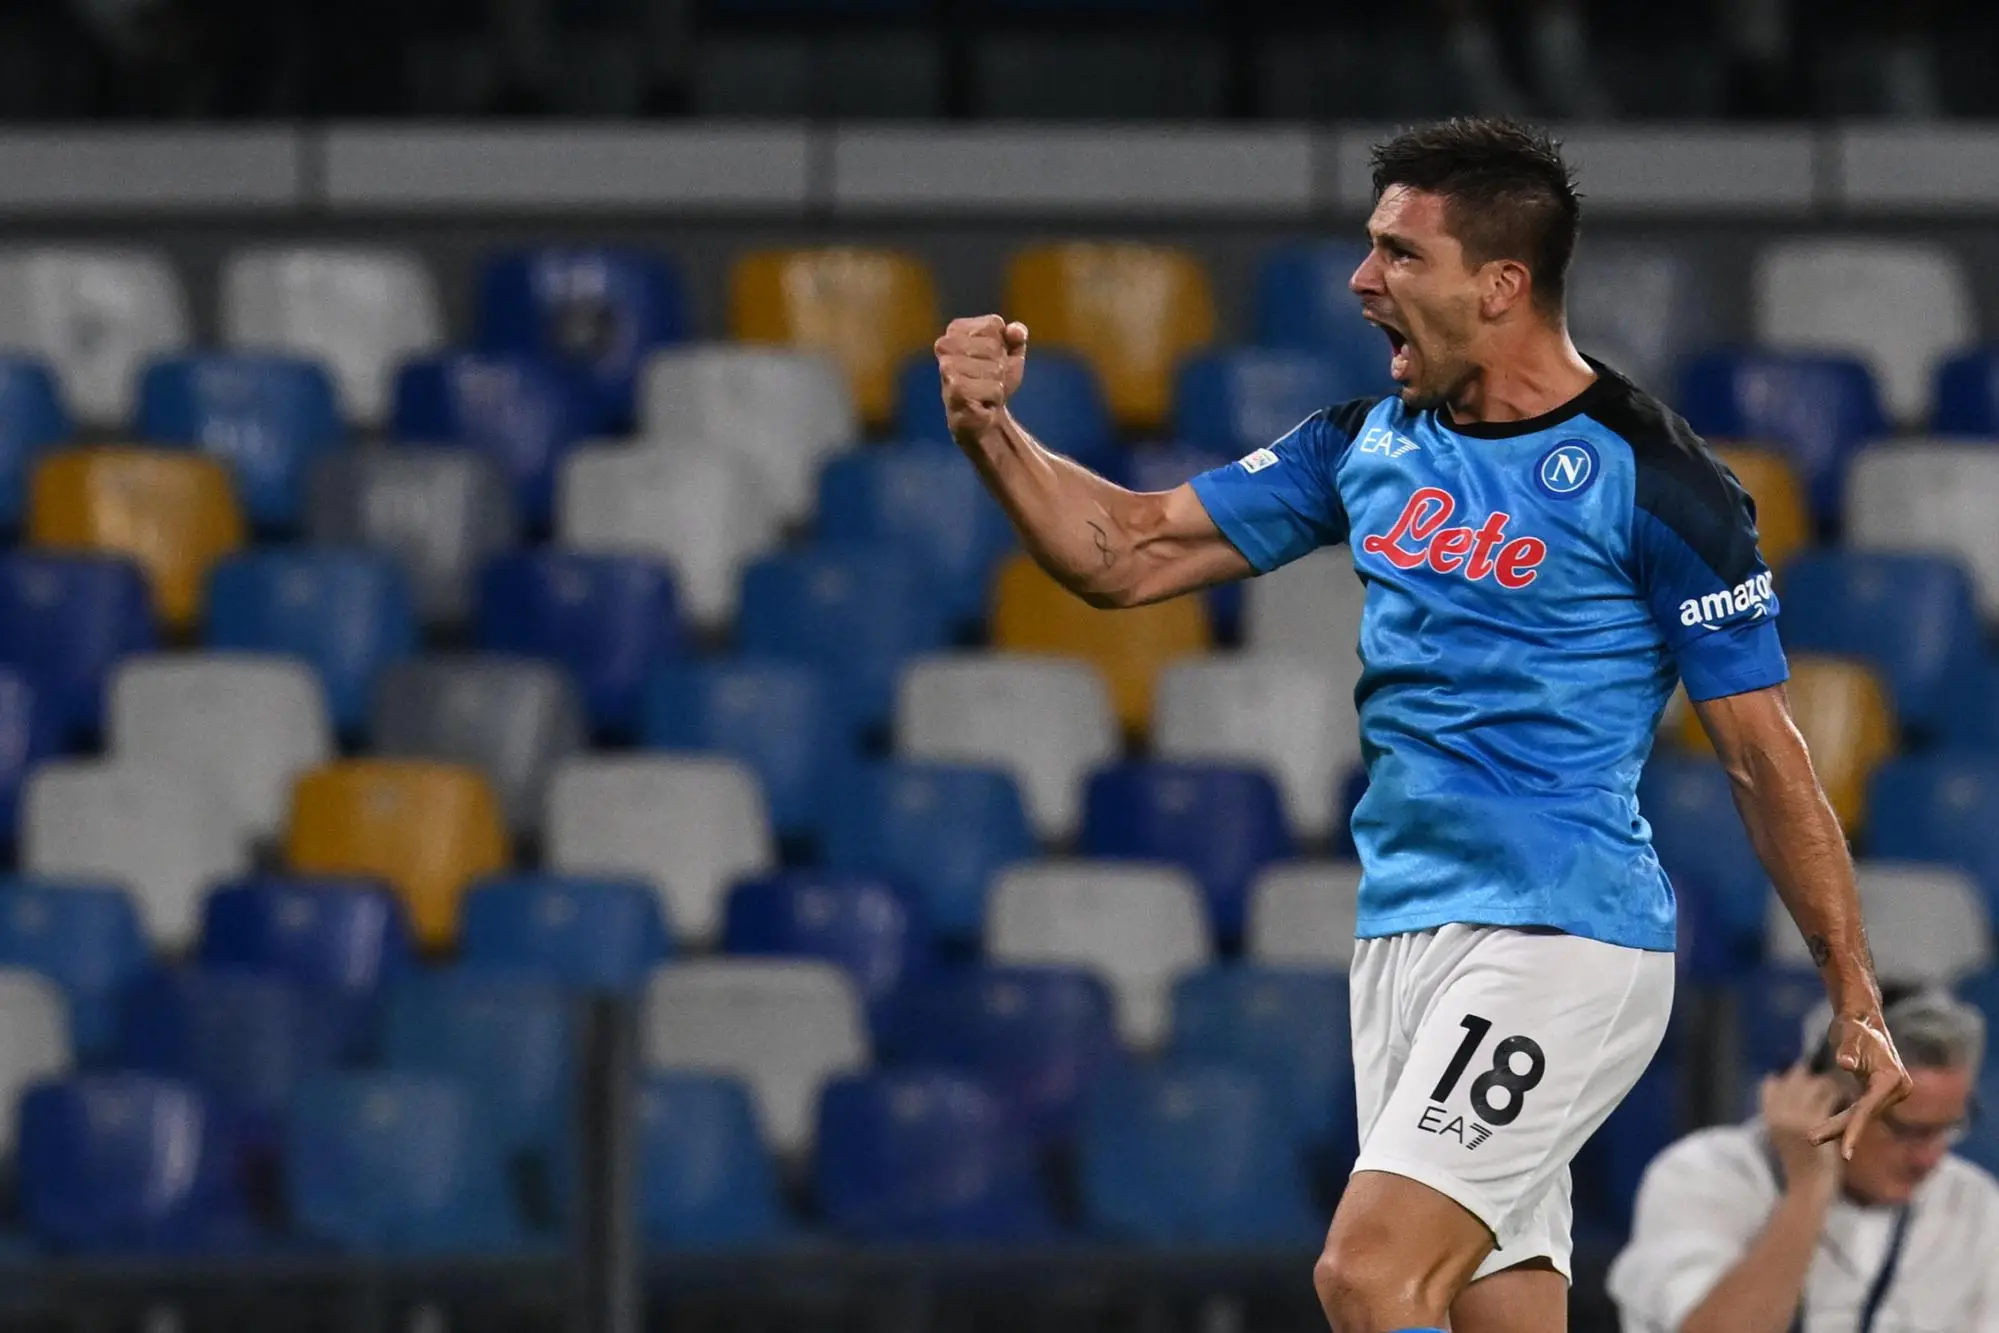 Napoli's foreward Giovanni Simeone jubilates with his teammate after scoring the goal during the UEFA Champions League first leg group A soccer match between SSC Napoli and Liverpool FC at the 'Diego Armando Maradona' stadium in Naples, Italy, 7 September 2022 ANSA / CIRO FUSCO